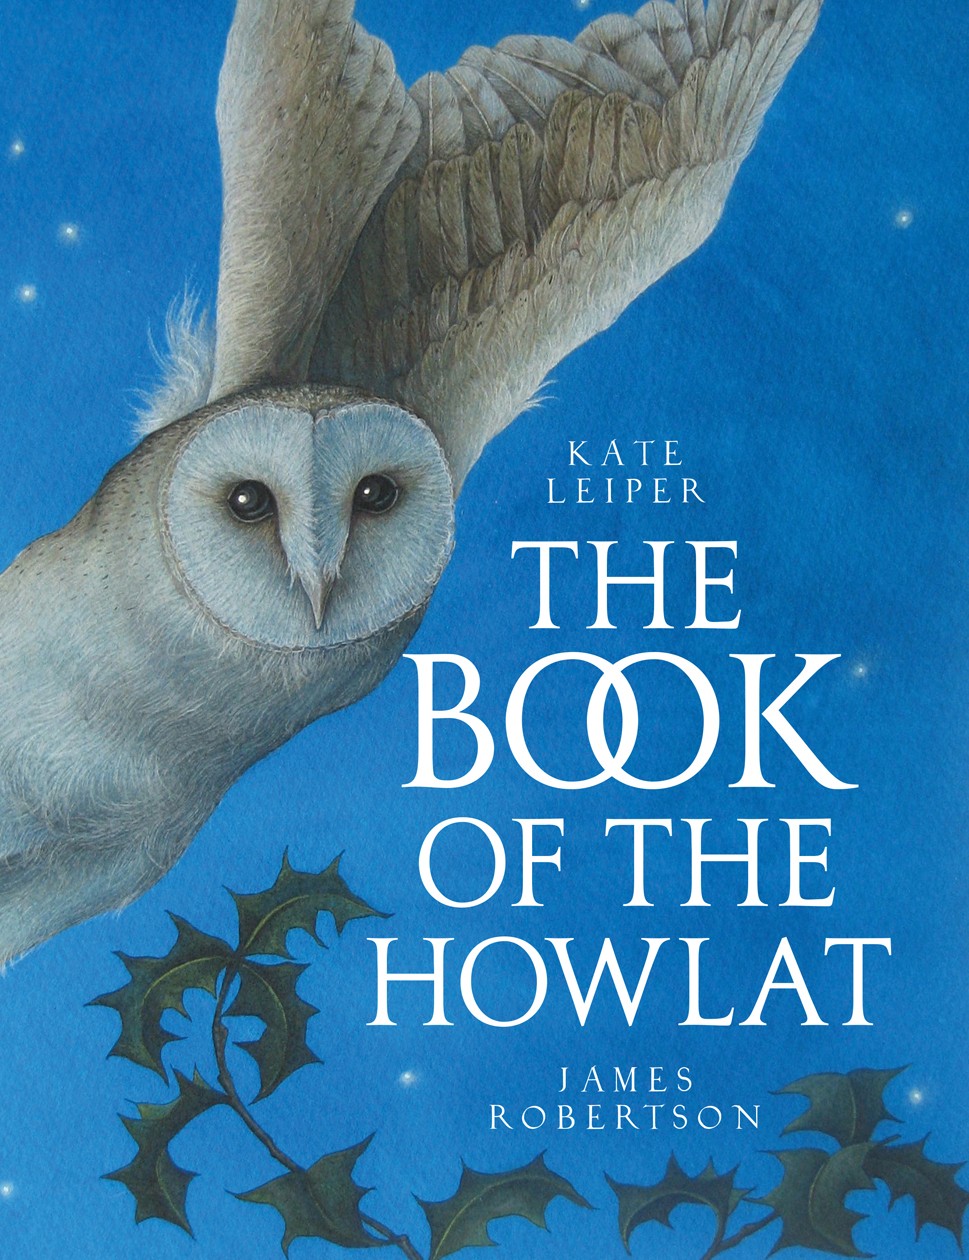 James Robertson & Kate Leiper - 'The Book of the Howlat'